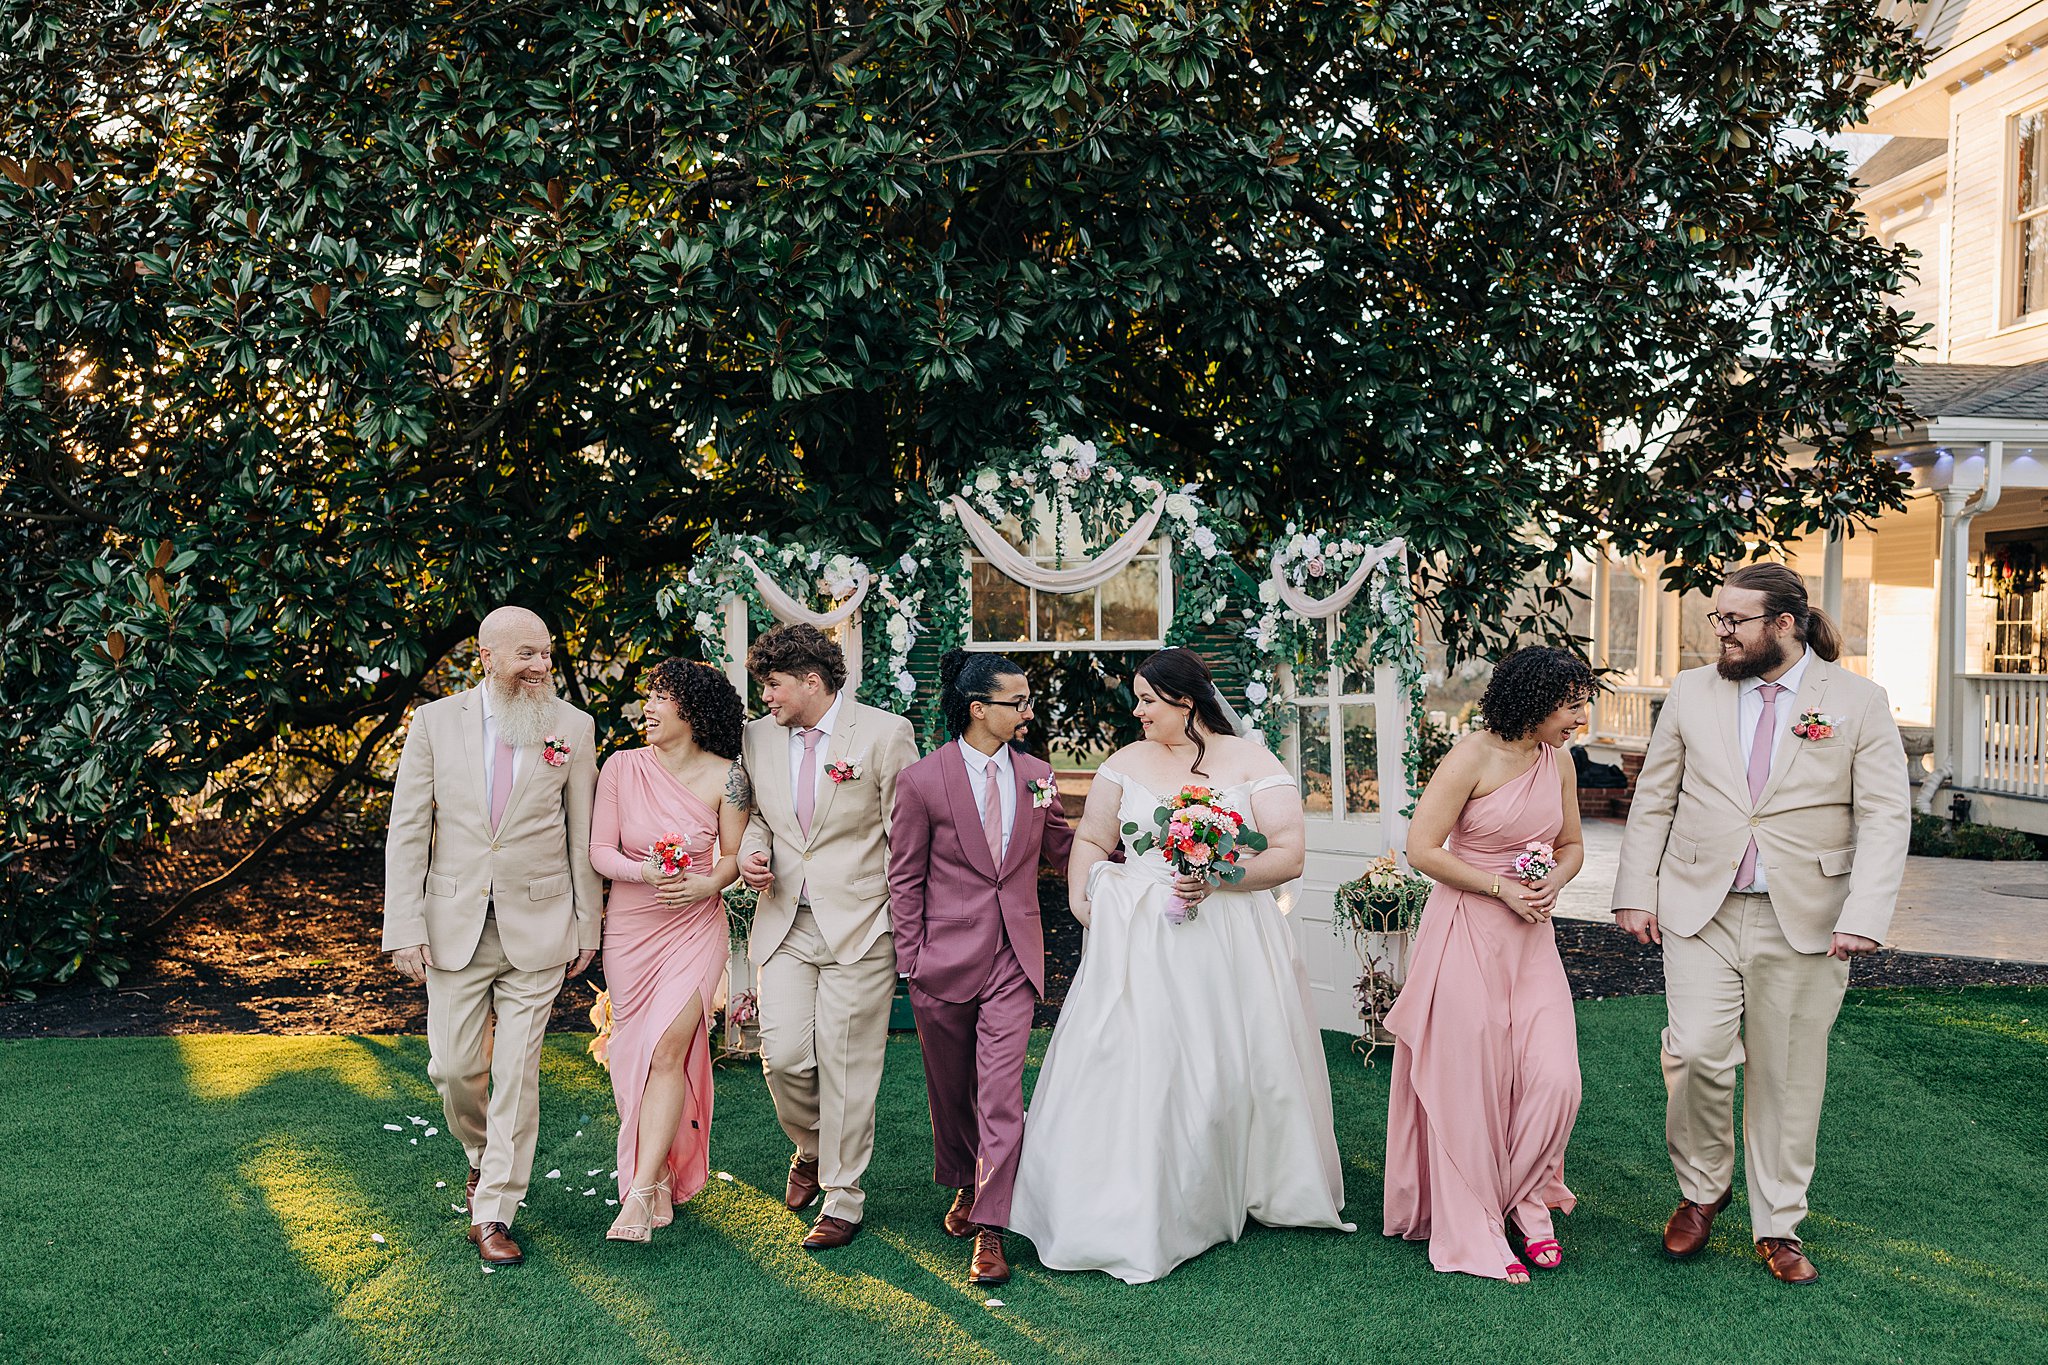 Newlyweds walk up the aisle on the lawn laughing with their wedding party